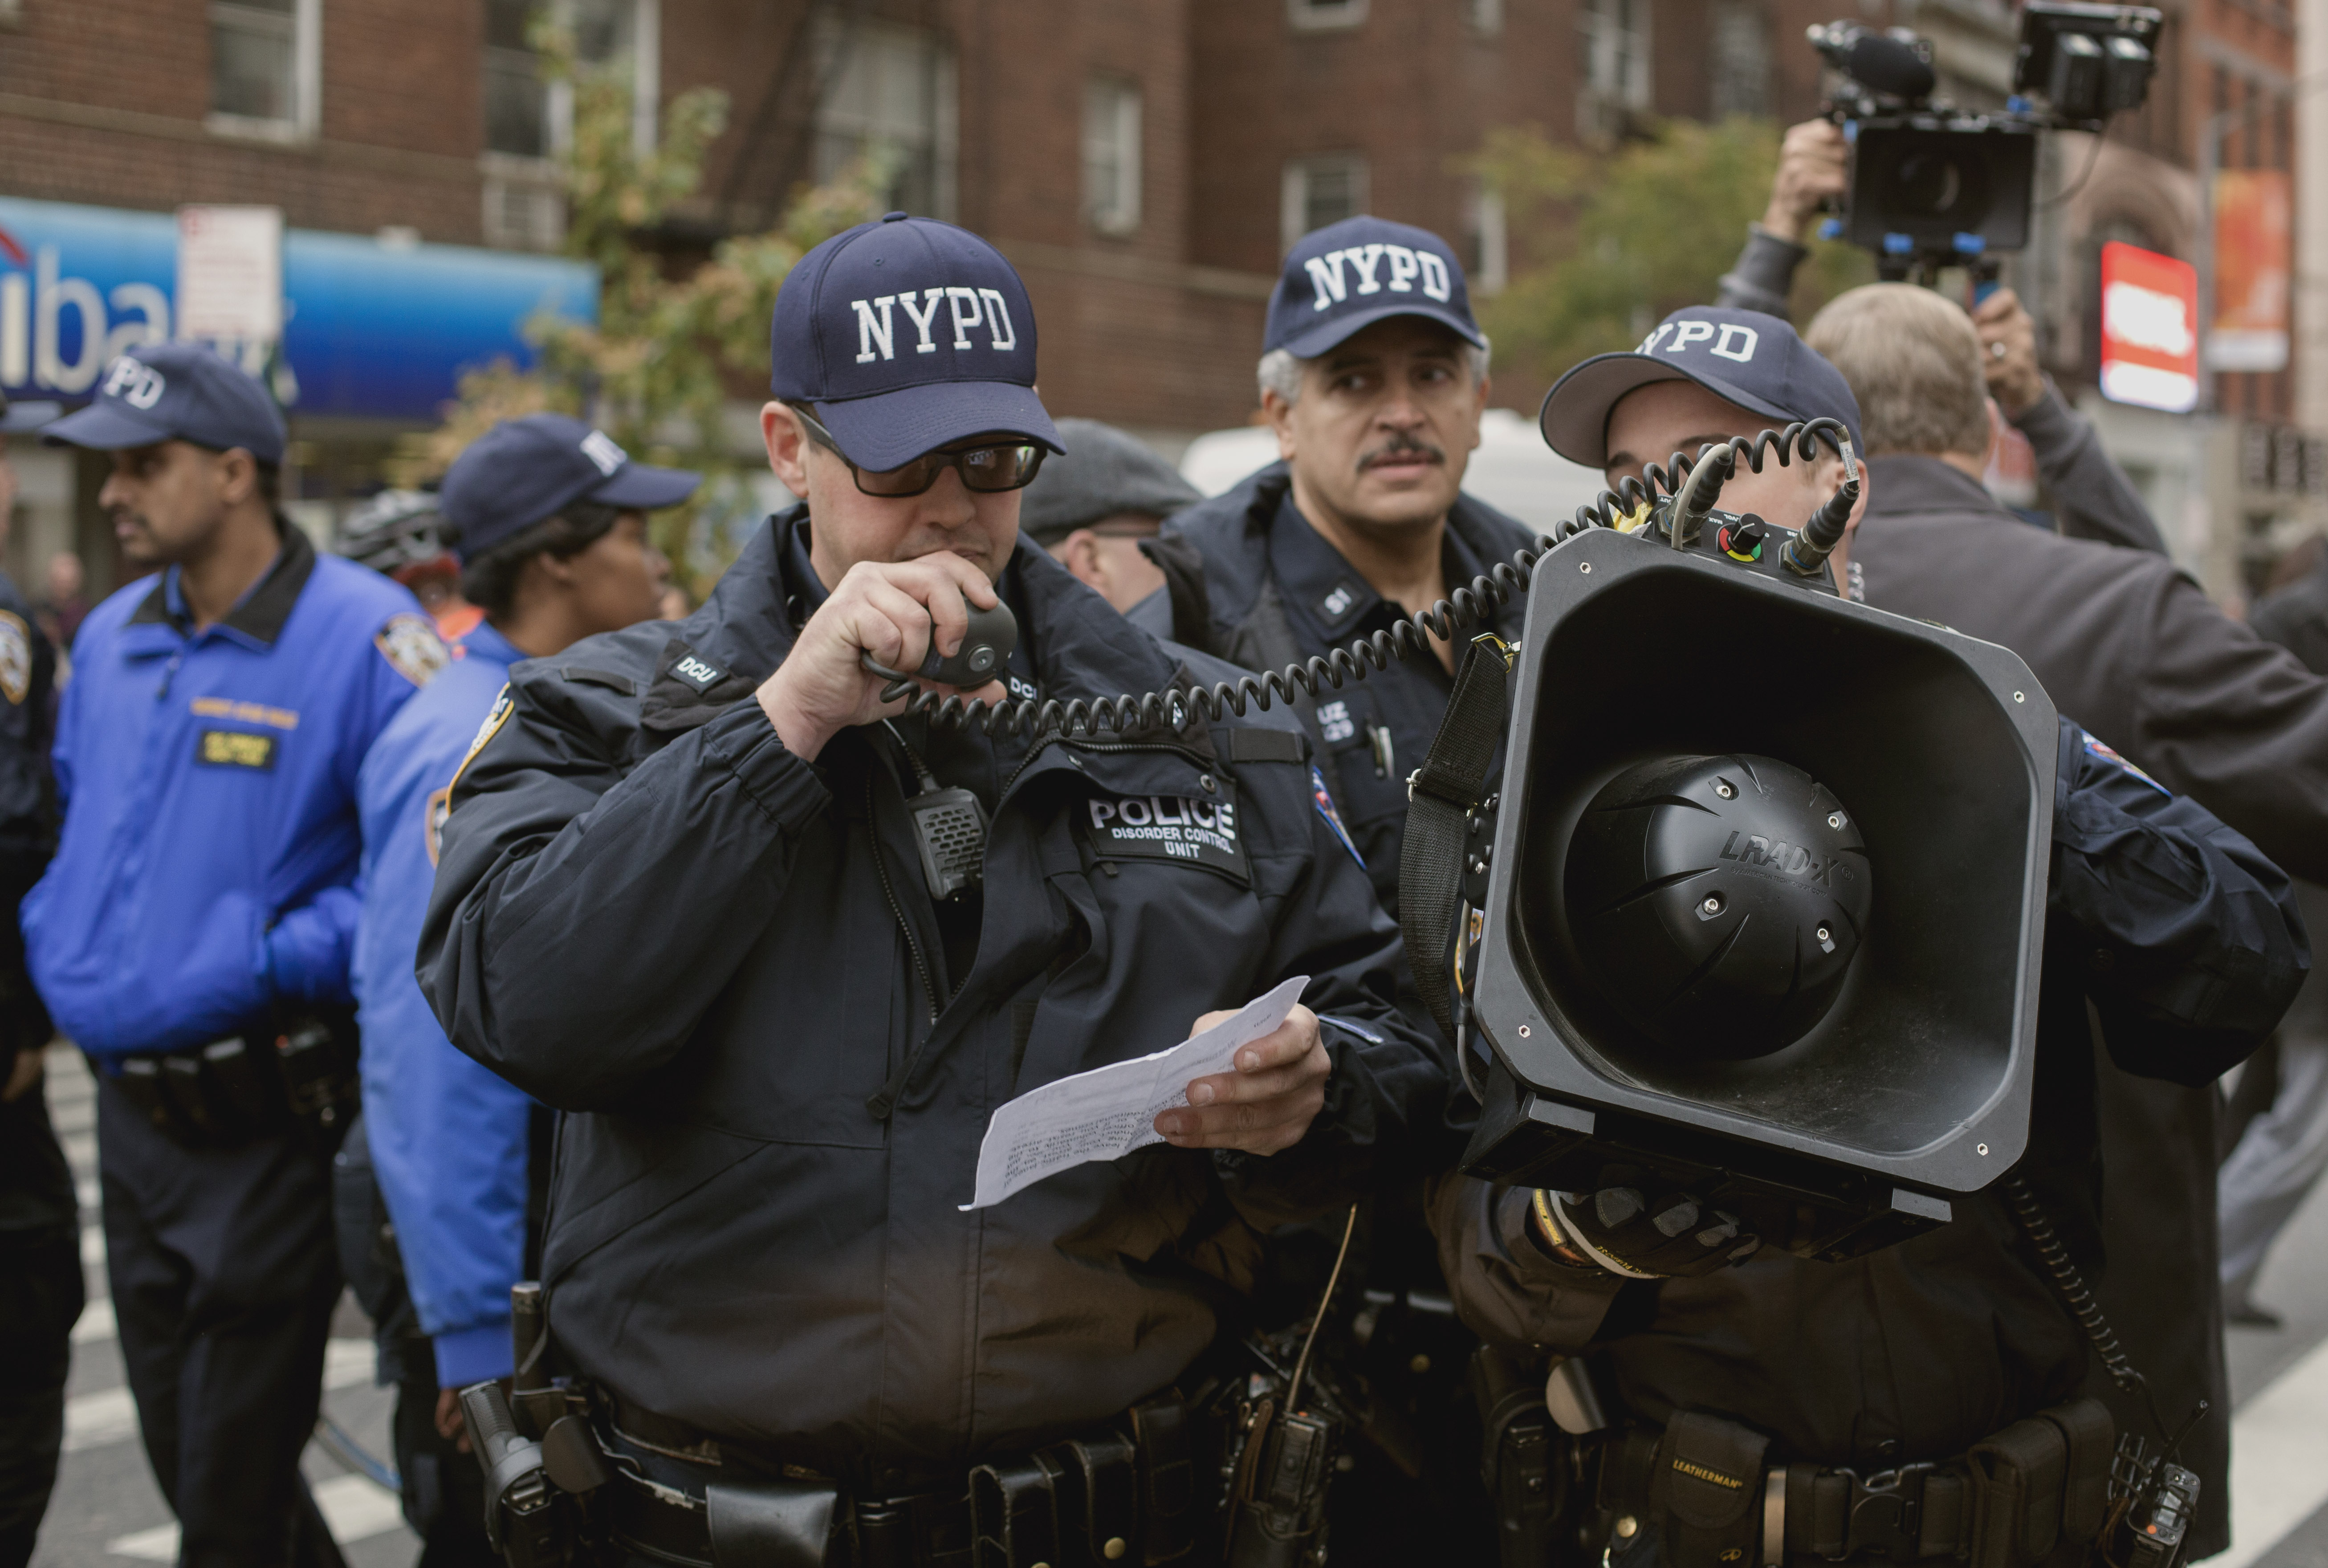 Members of the SRG (Strategic Response Group) of the NYPD in 2015.